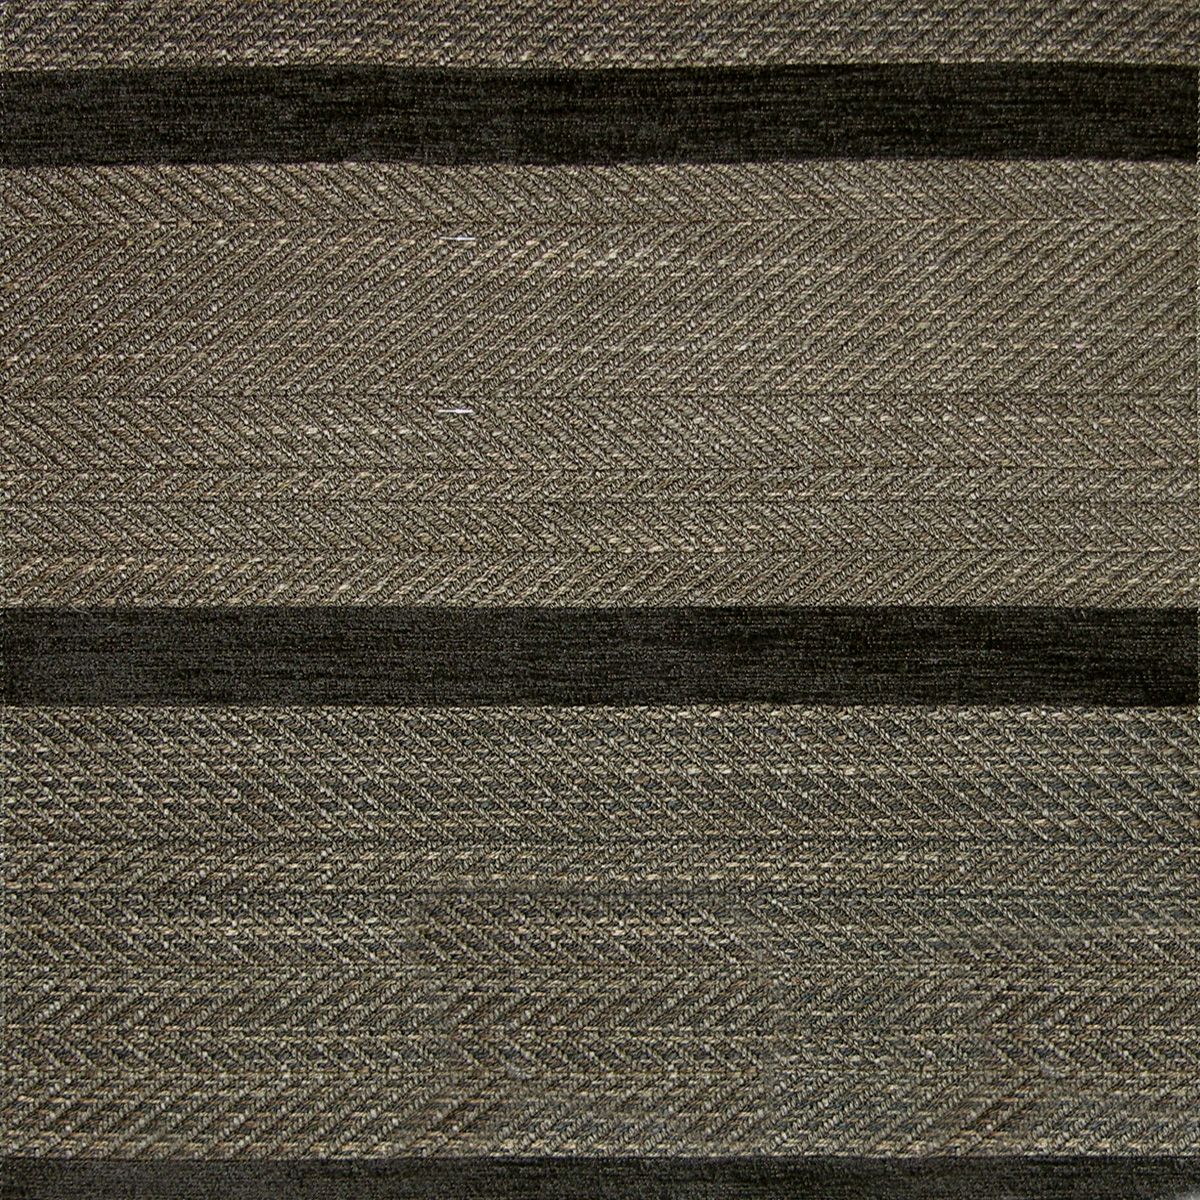 Hickory fabric in espresso color - pattern number AM MK481501 - by Scalamandre in the Old World Weavers collection